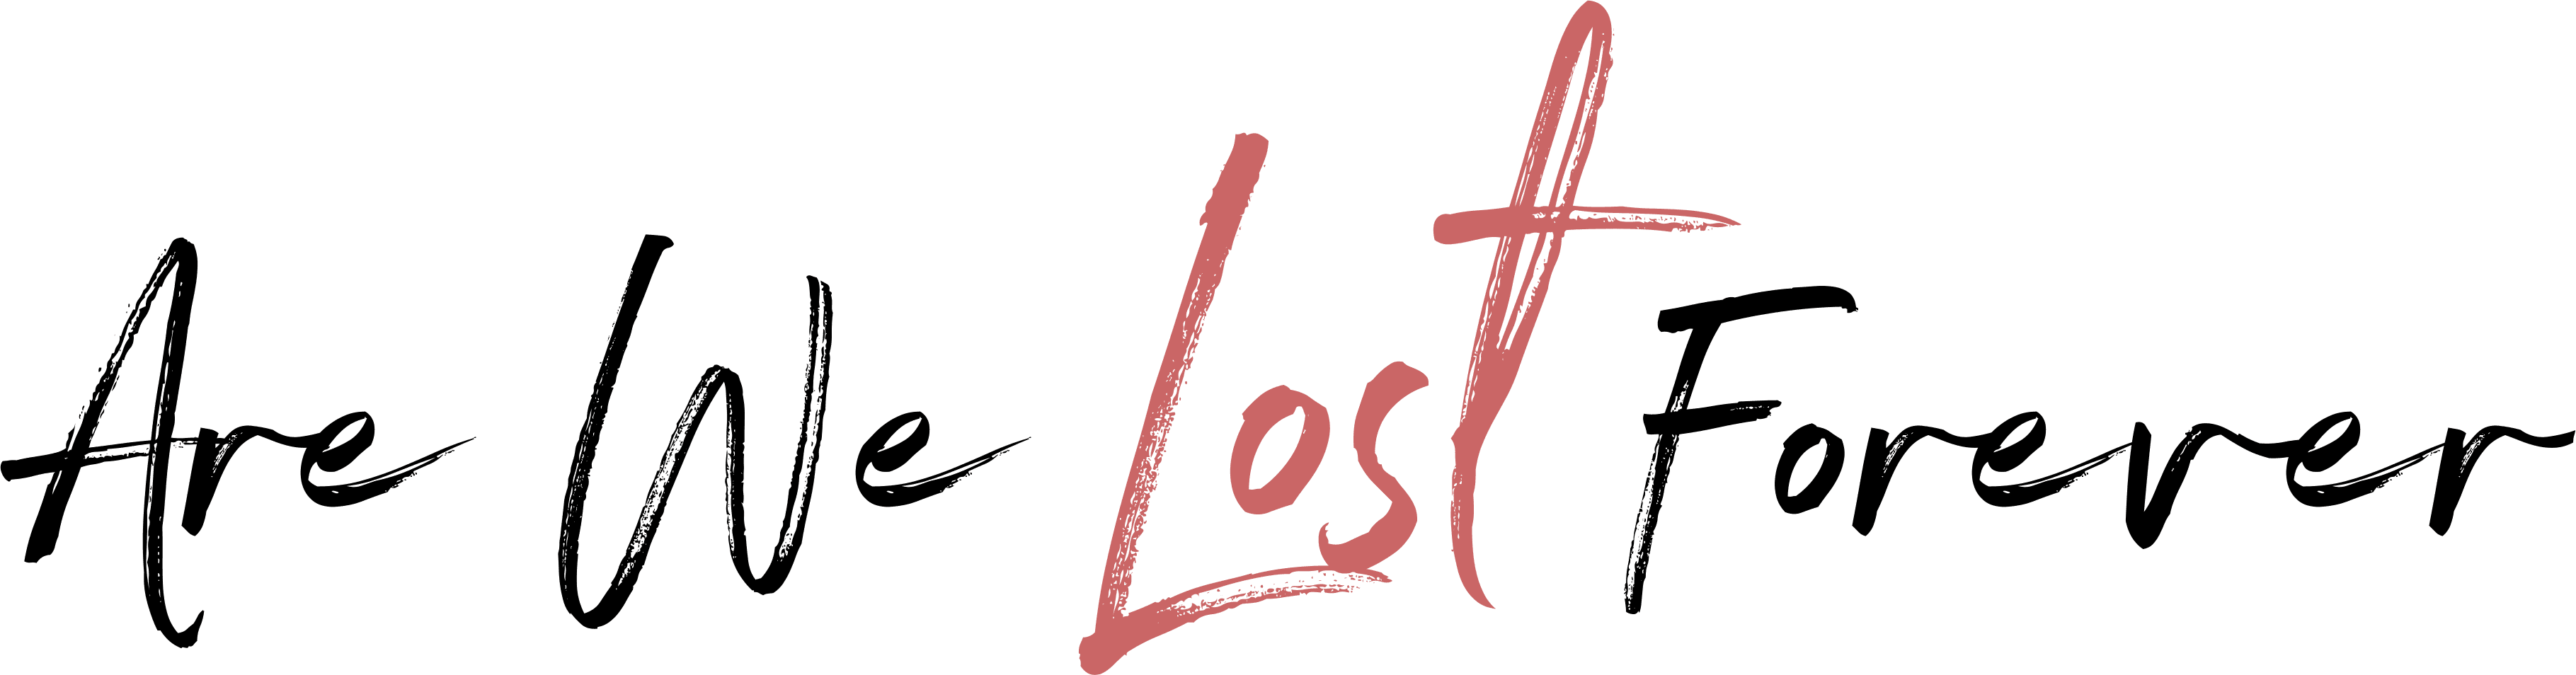 Are We Lost Forever logo